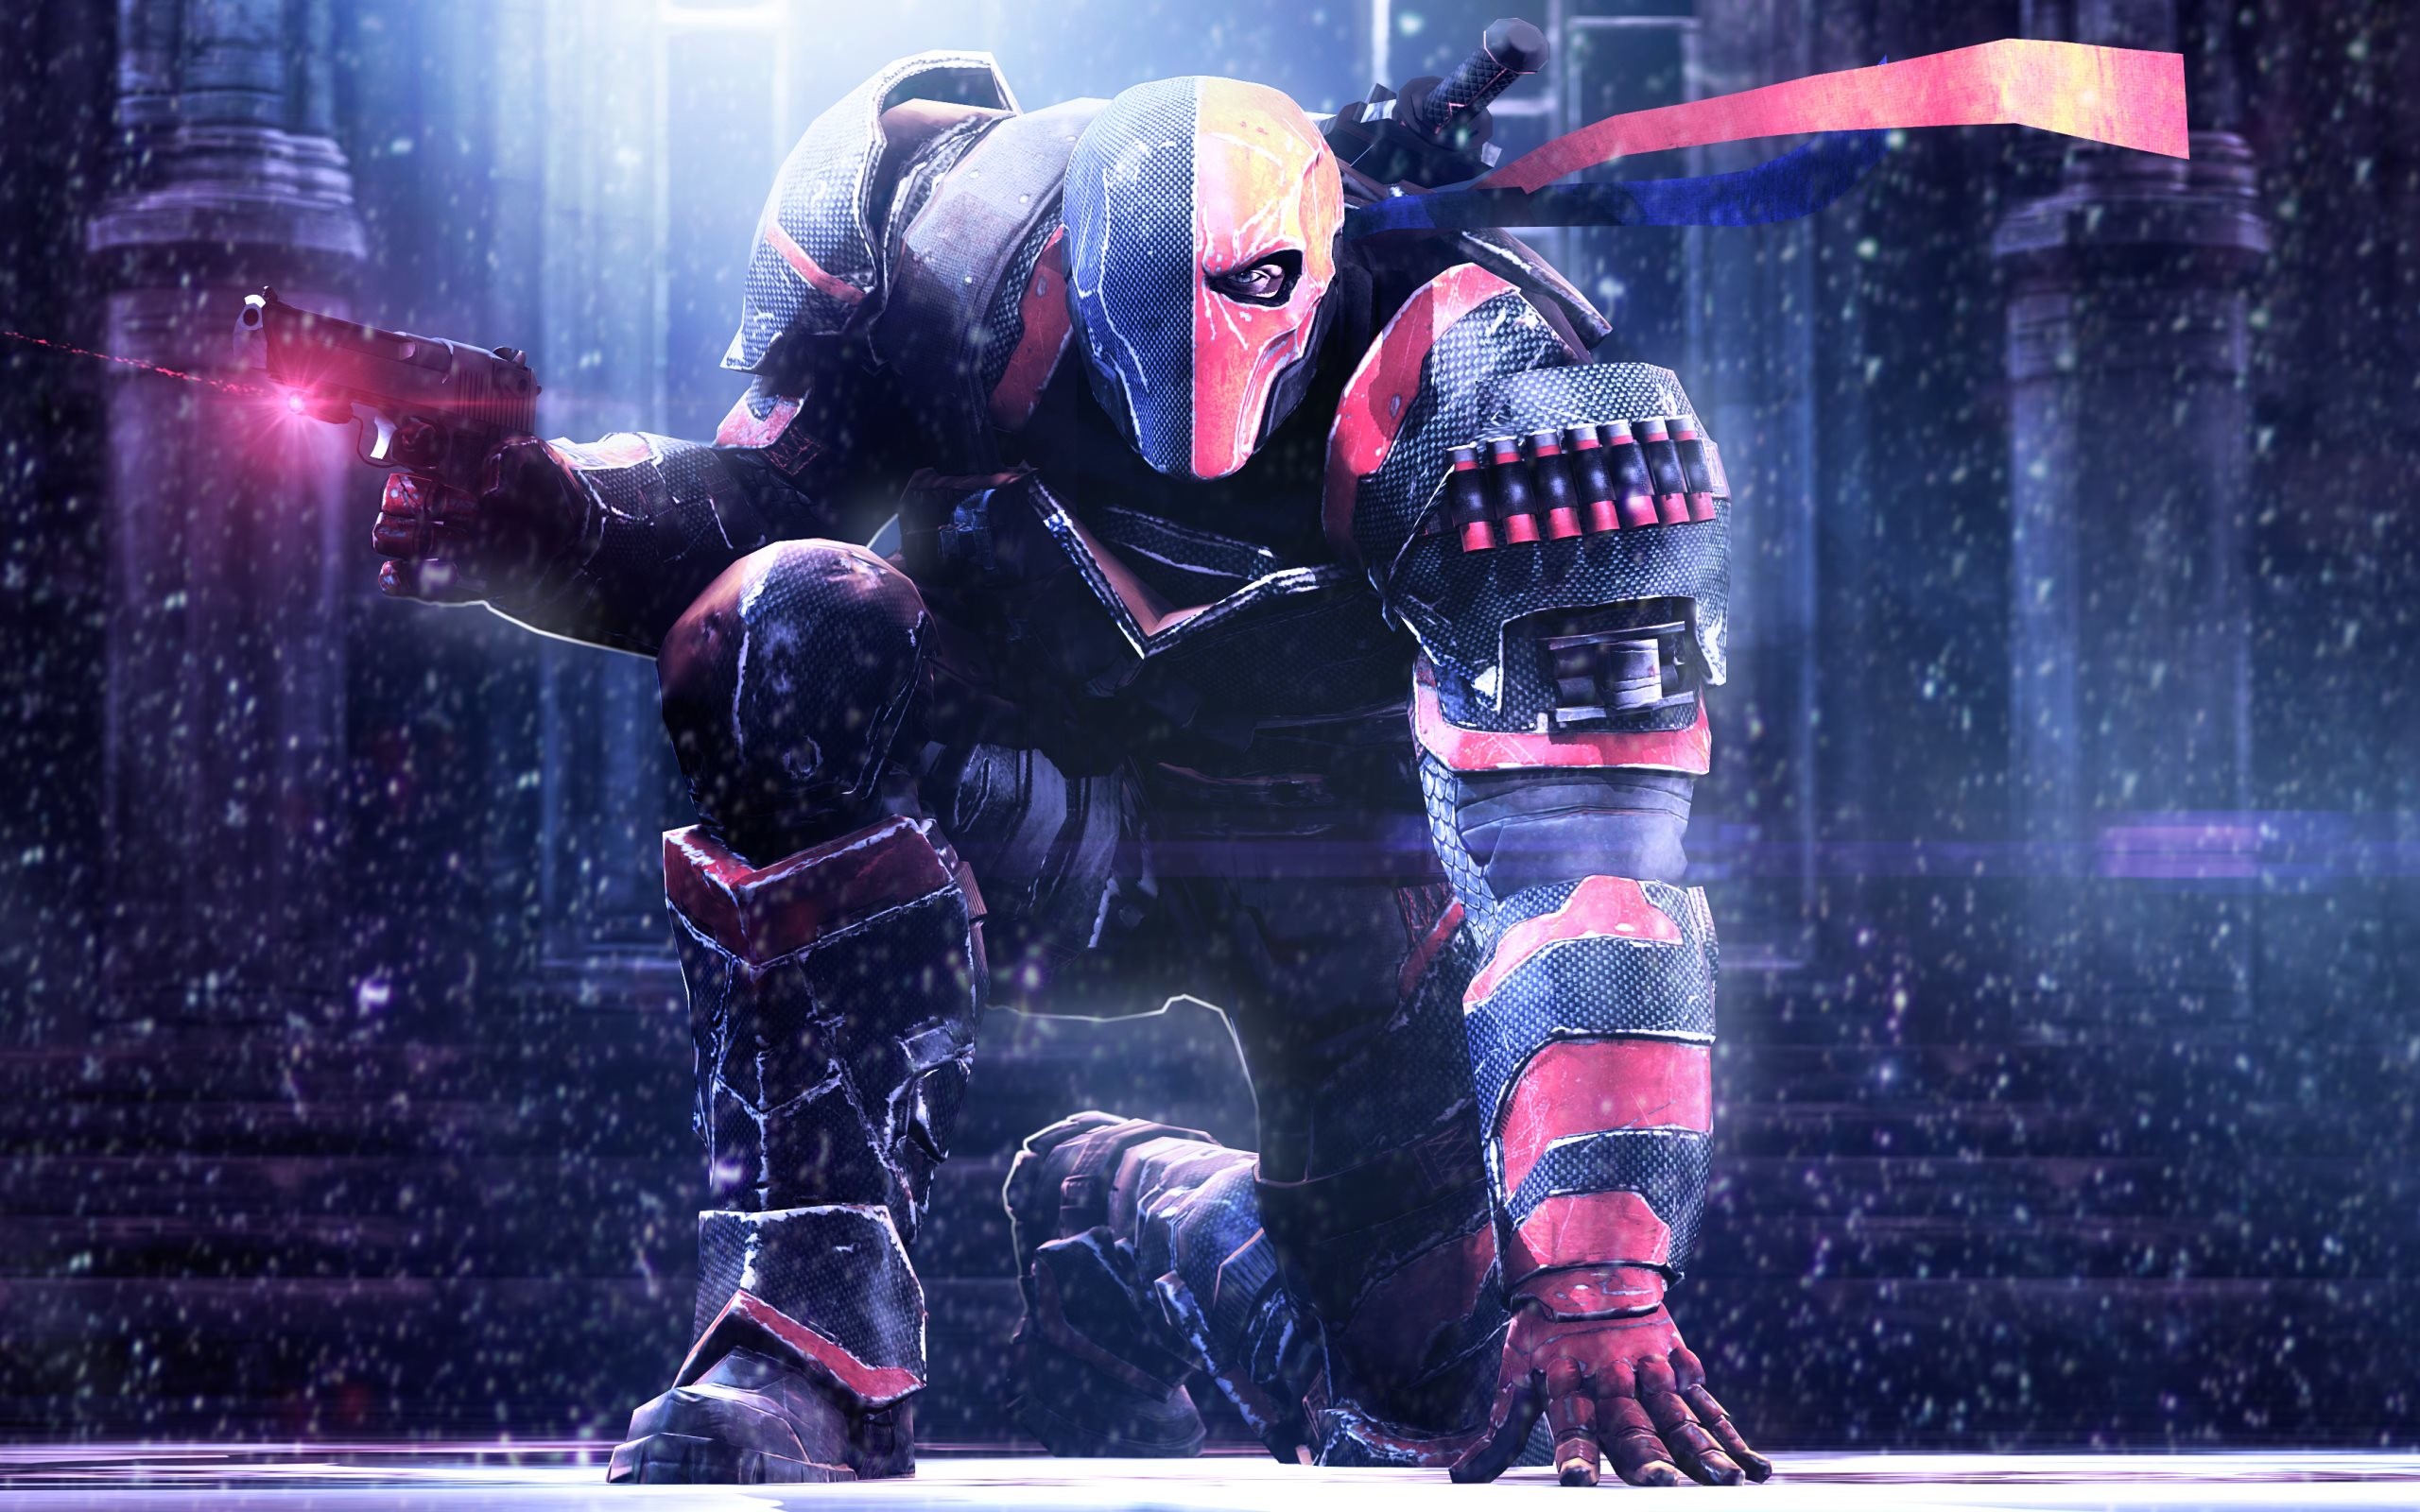 2560x1600 Deathstroke, the character from Batman: Arkham Origins game is listed here  in one 4K wallpaper Â· Download the wallpaper optimized for apply in phones,  ...